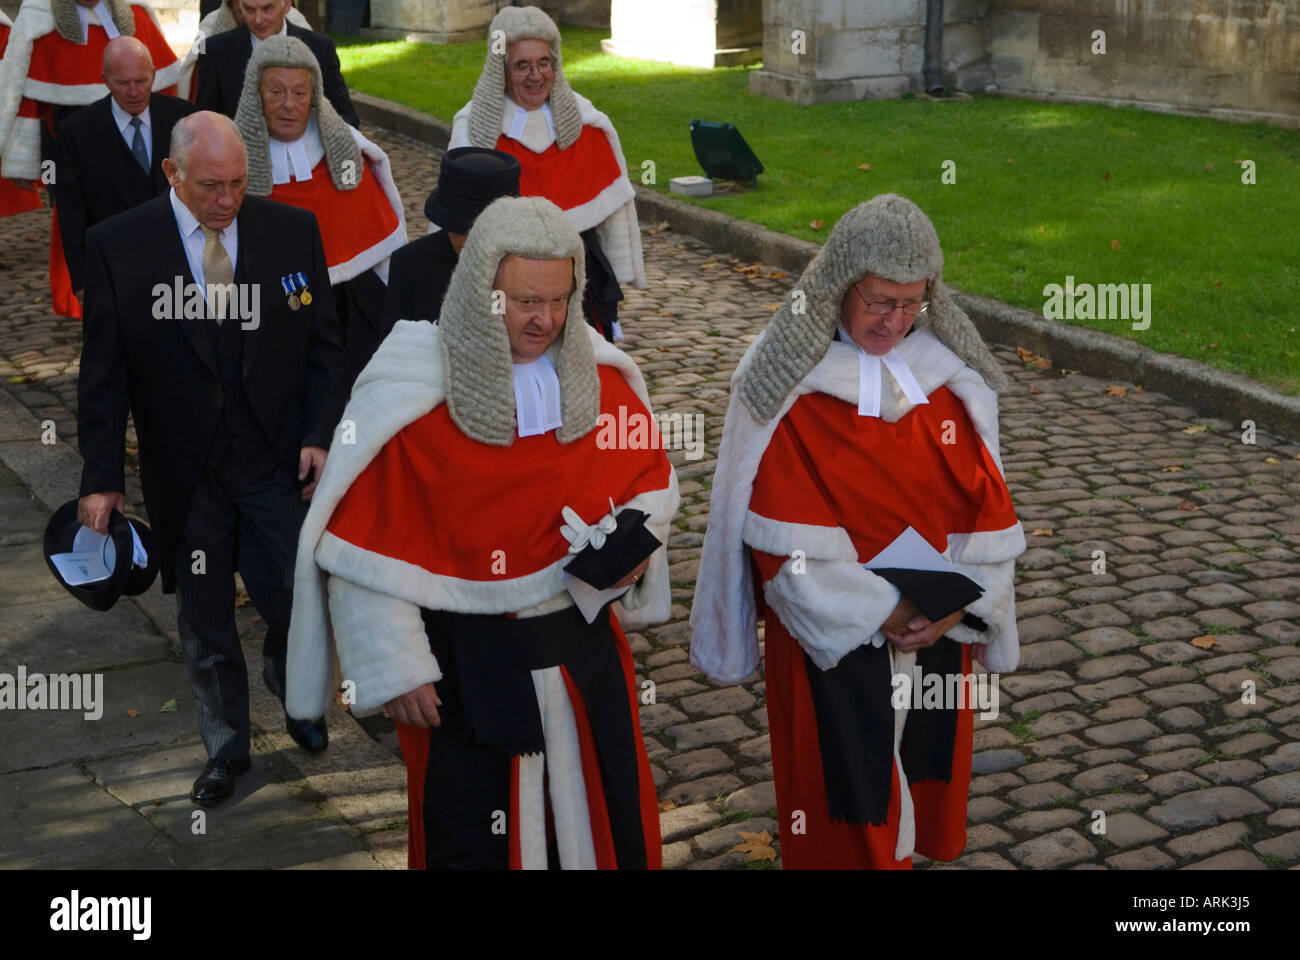 High Court Judges in full ceremonial dress attend the Lord Chancellors Breakfast, which is the start of the new legal year 2006 2000s England UK Stock Photo